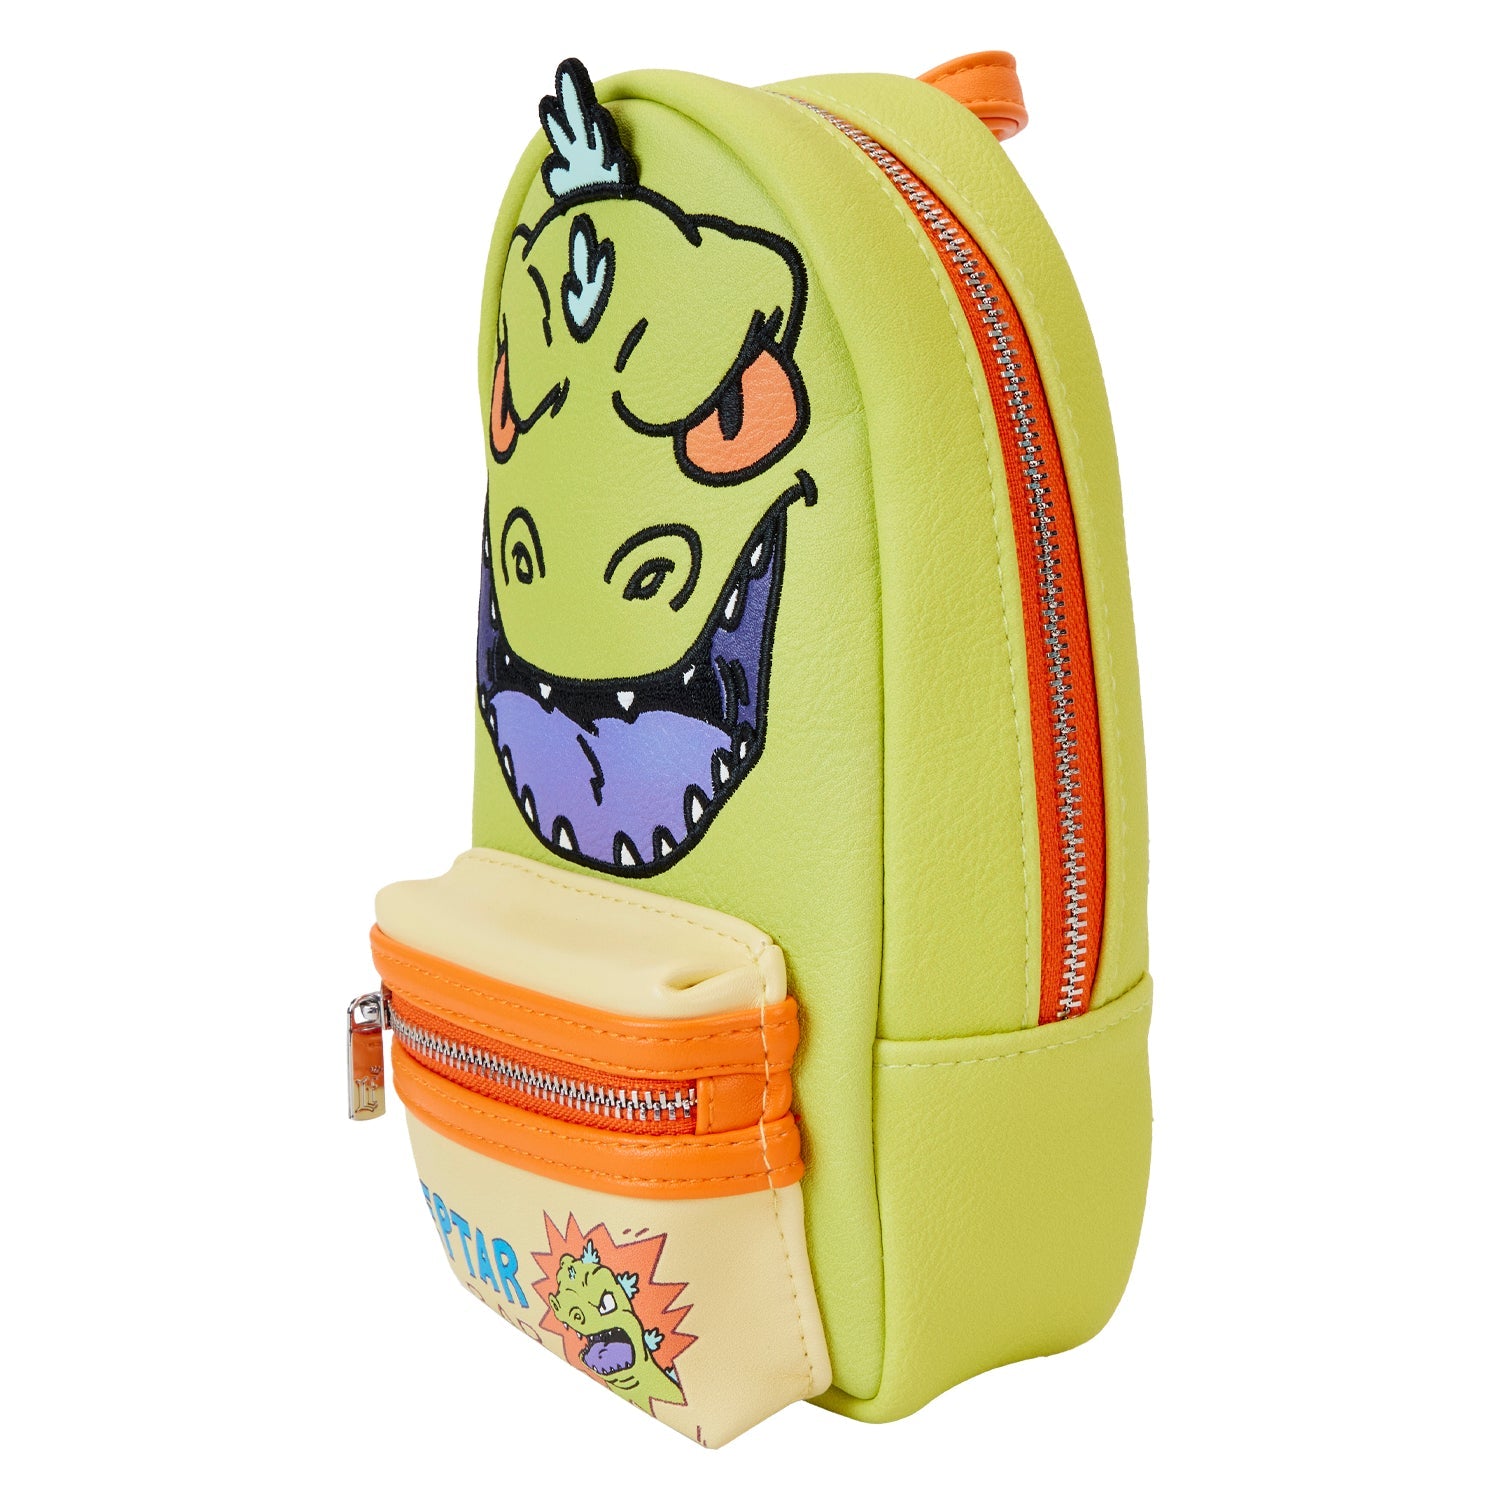 Loungefly x Nickelodeon Rewind Mini Backpack Pencil Case - GeekCore